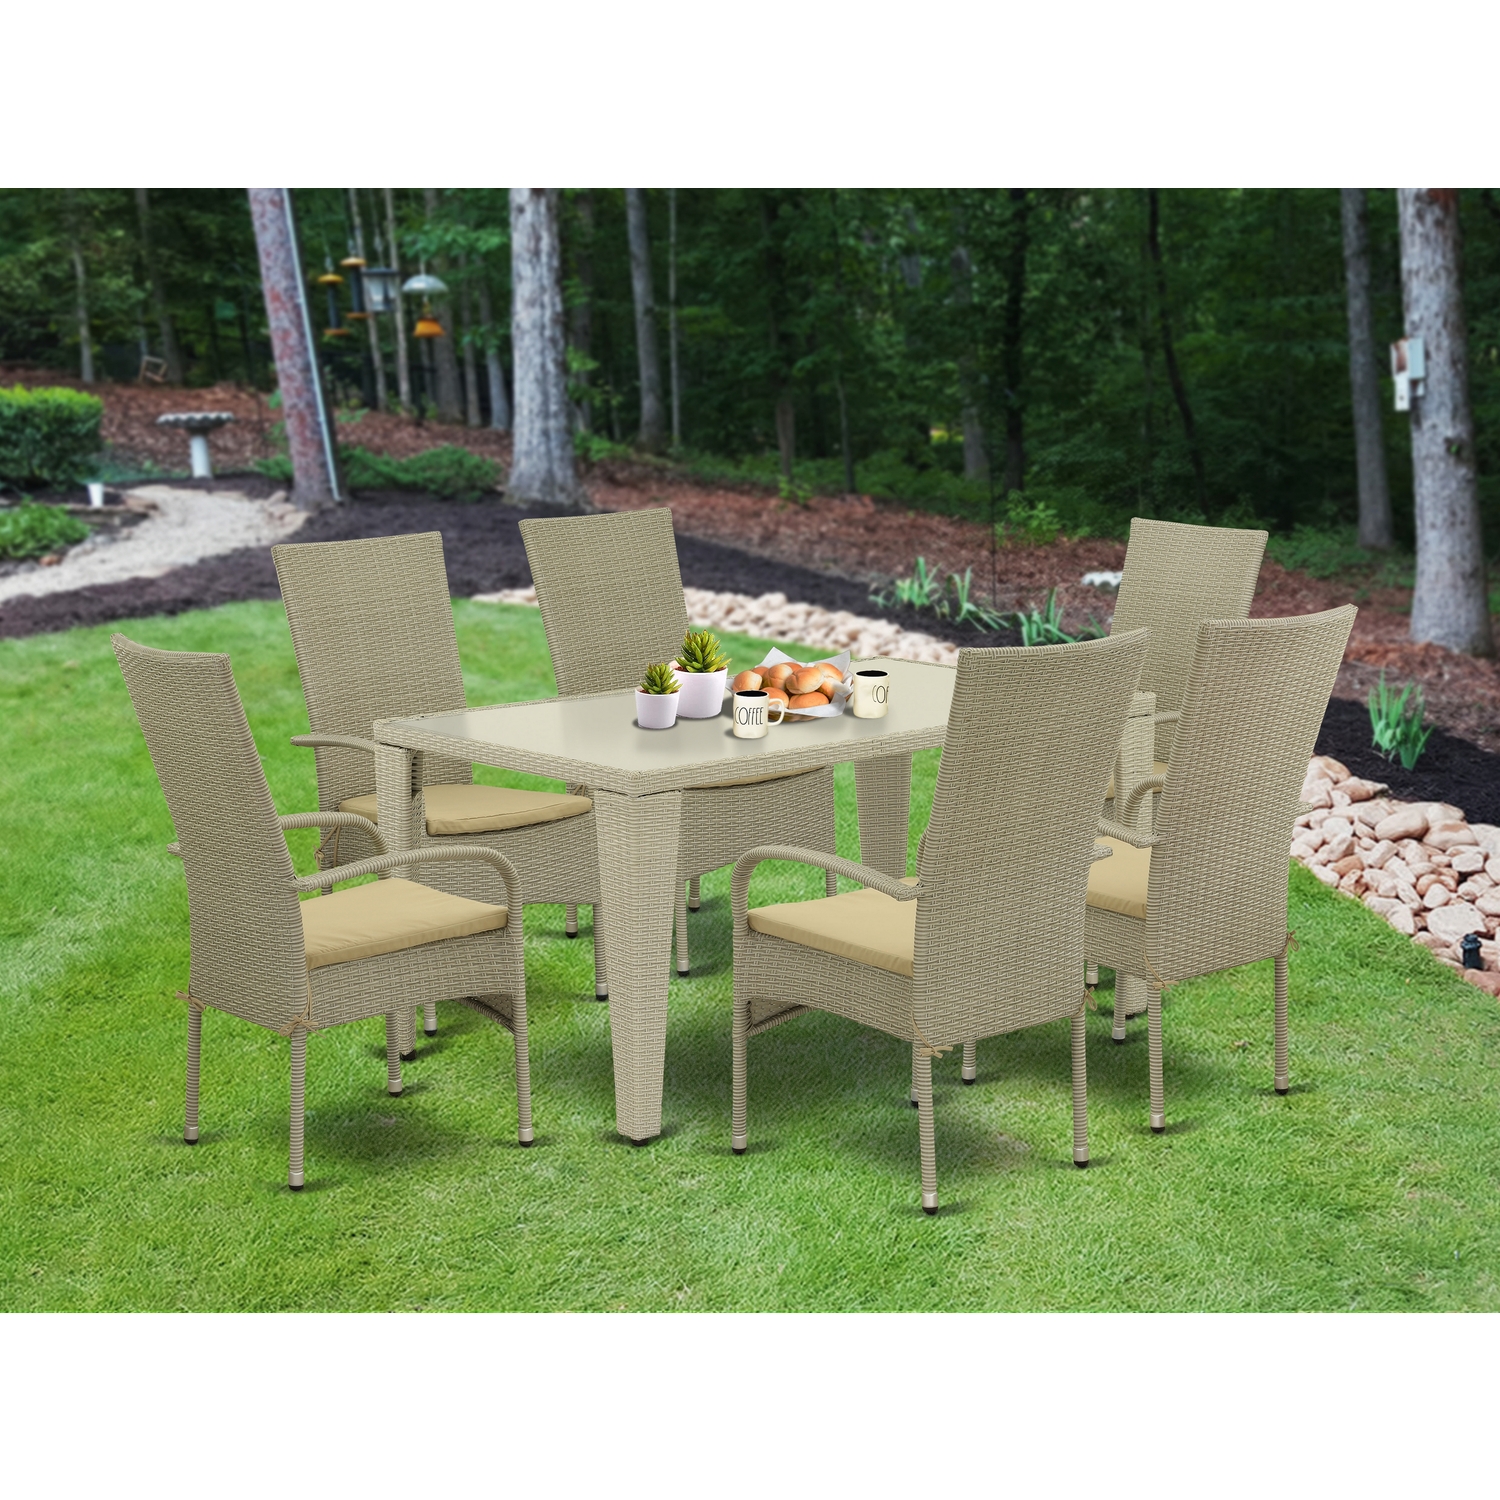 East West Furniture Gudhjem 7-piece Metal Patio Set with Armchairs in Natural - image 1 of 4